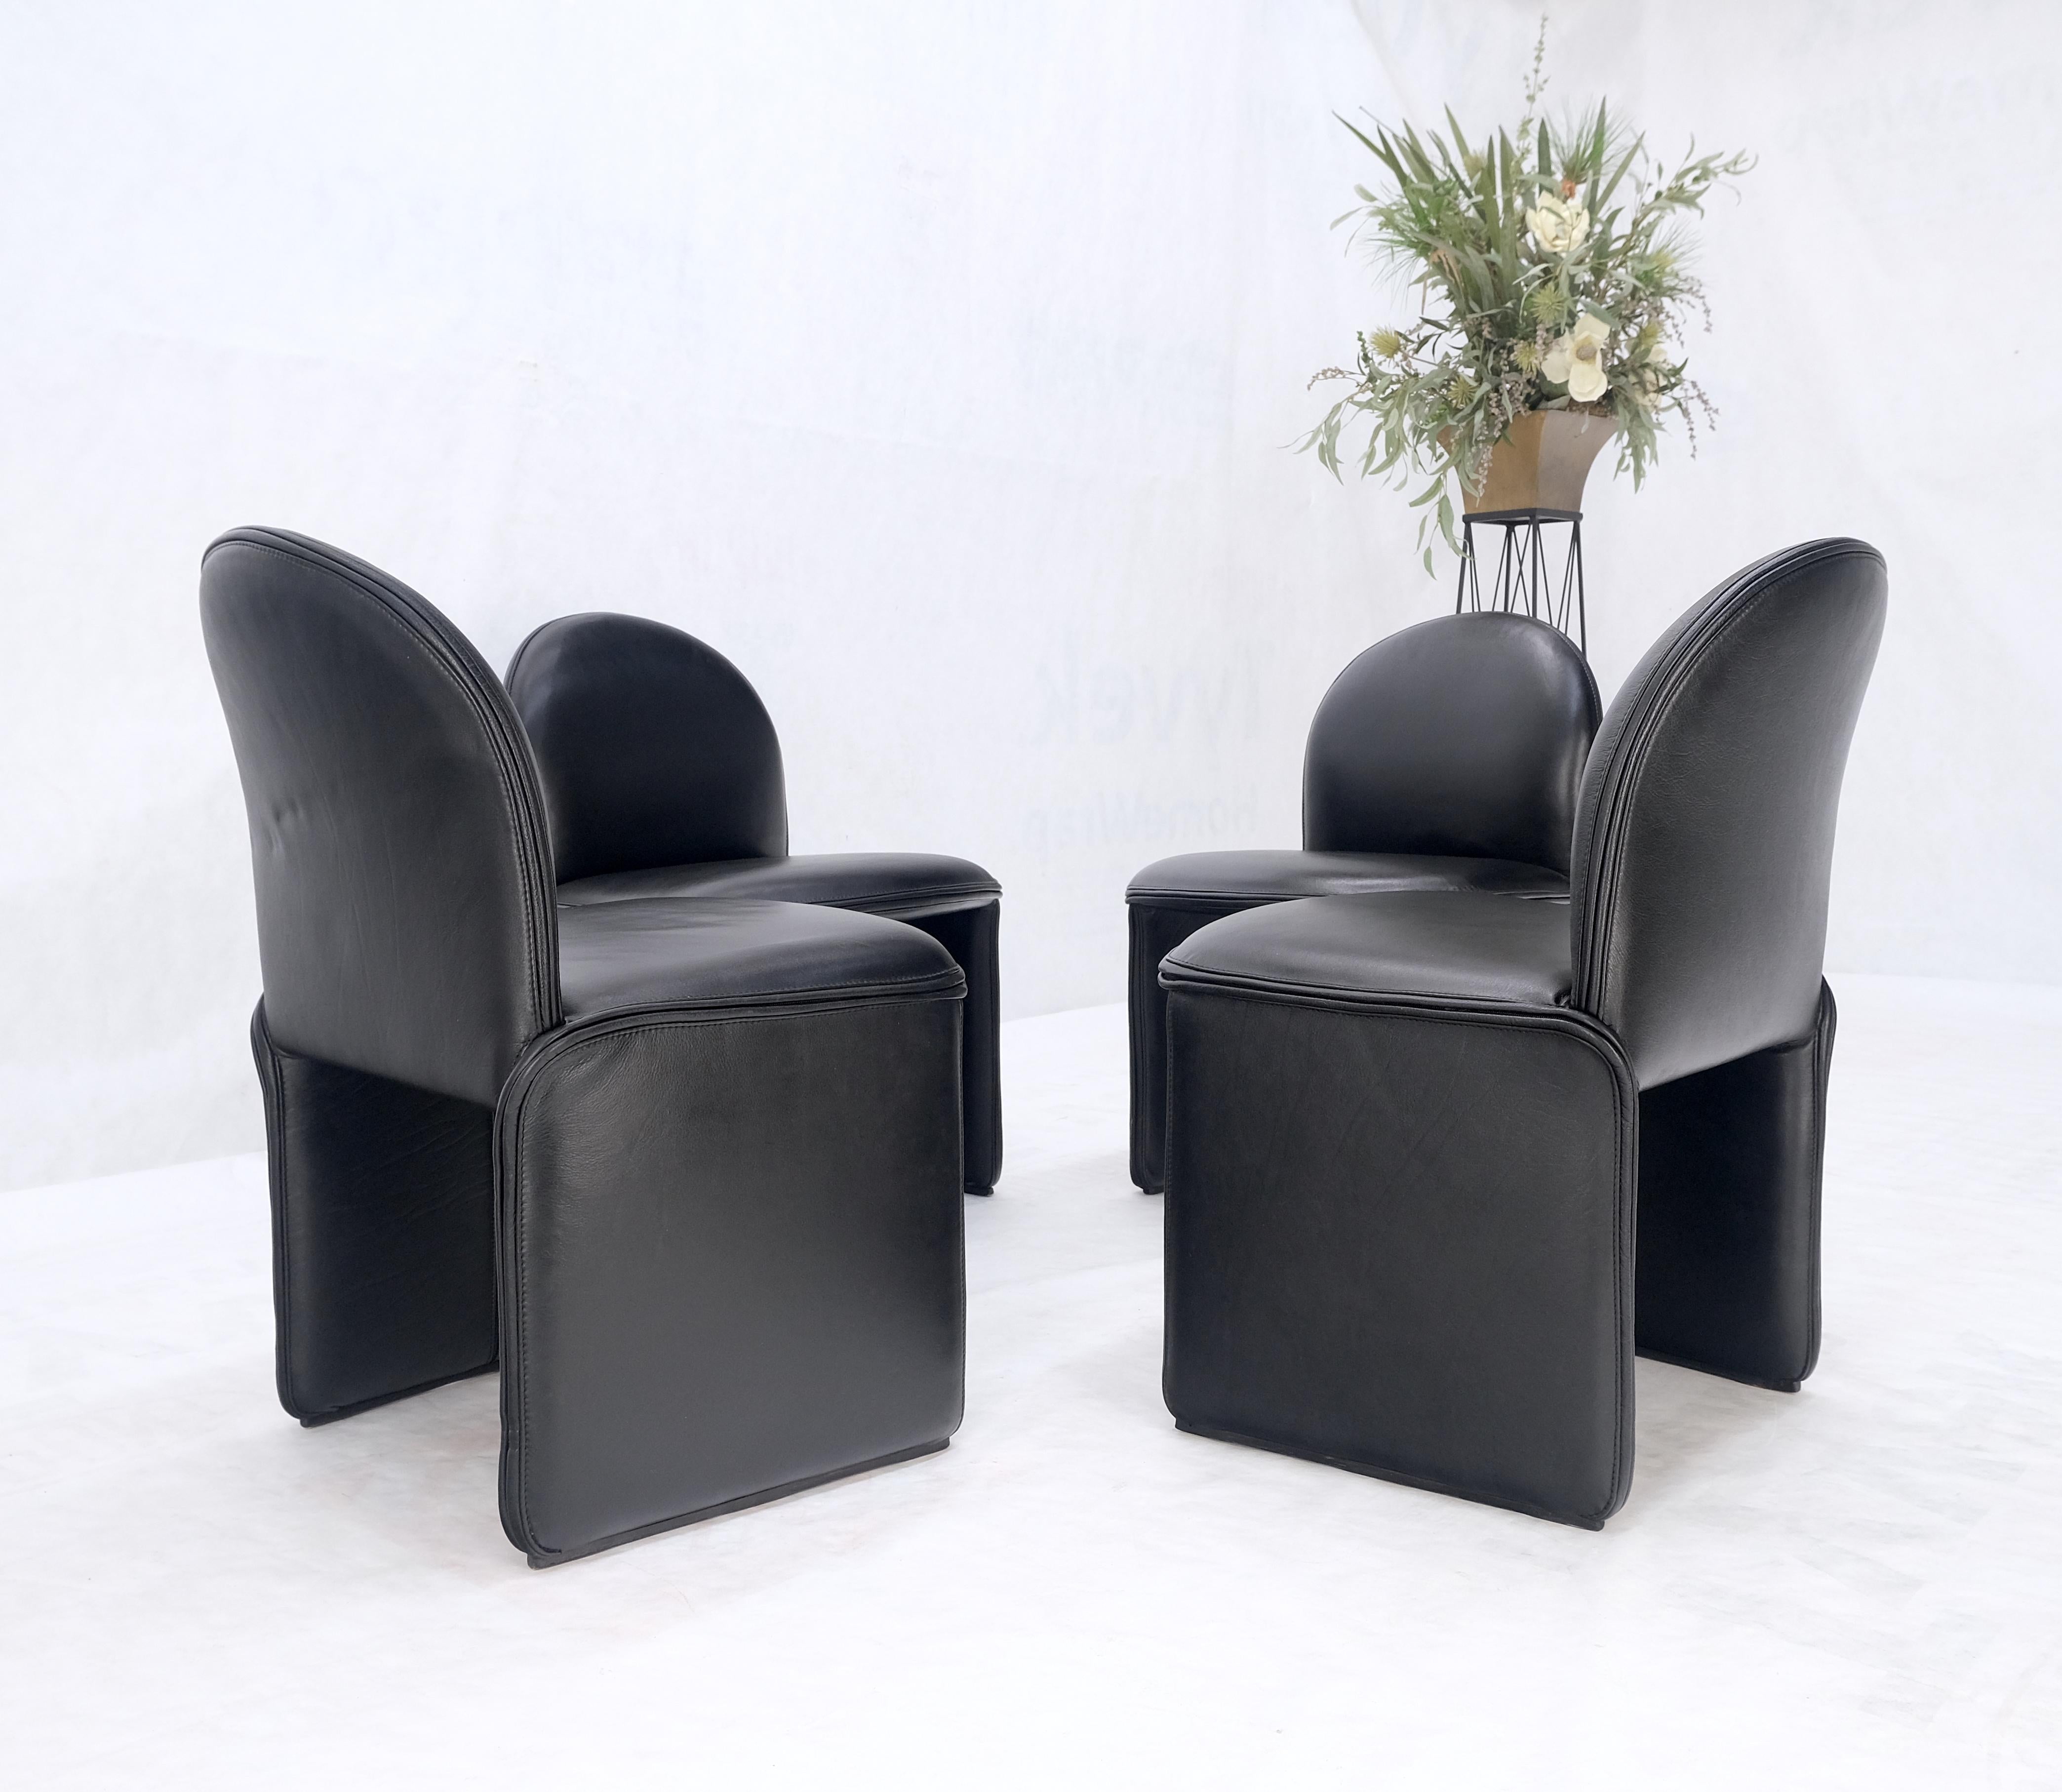 Set 4 Italian Mid Century Modern Black Leather Dining Chairs Bellini Style MINT! For Sale 5